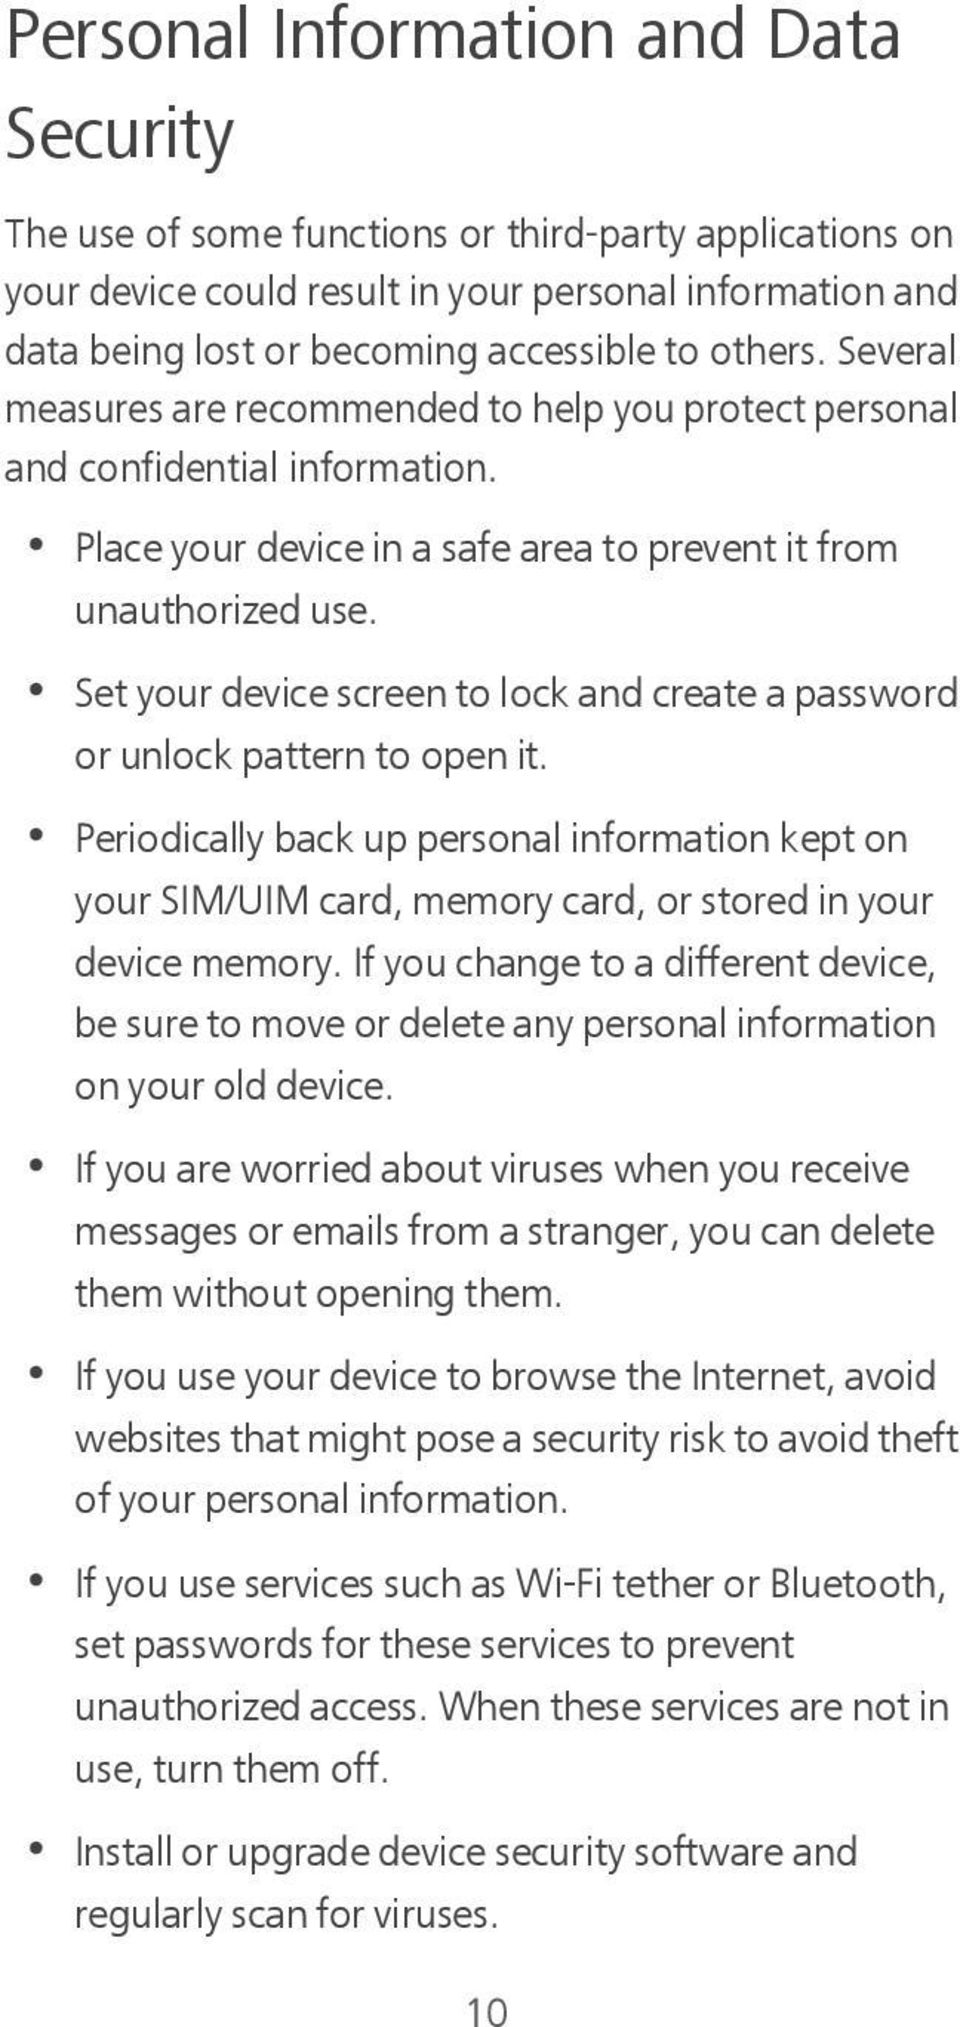 Set your device screen to lock and create a password or unlock pattern to open it. Periodically back up personal information kept on your SIM/UIM card, memory card, or stored in your device memory.